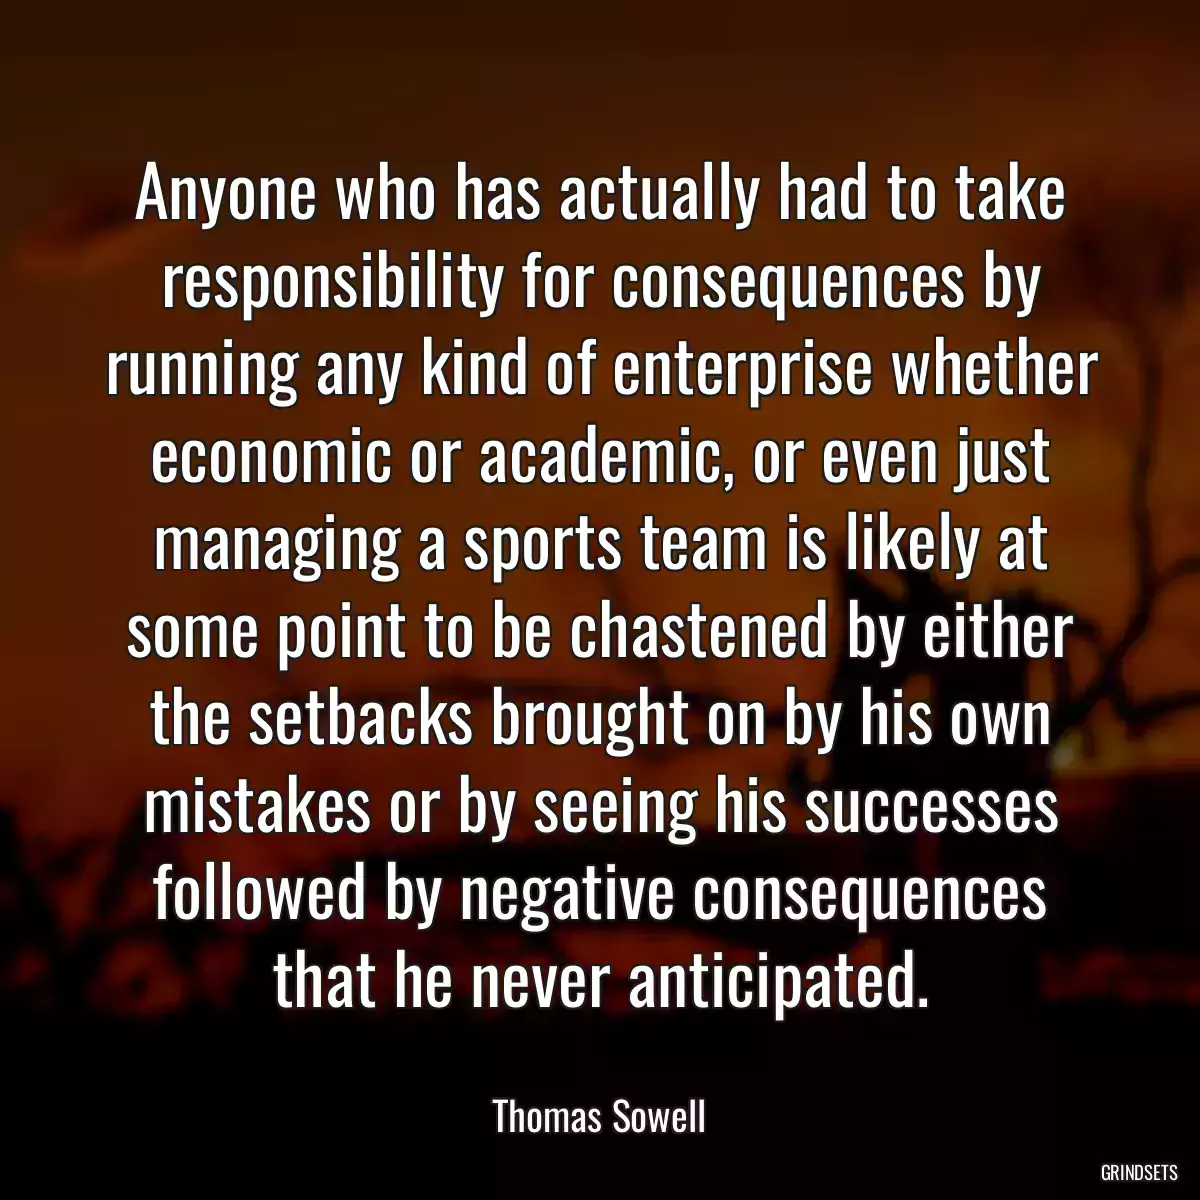 Anyone who has actually had to take responsibility for consequences by running any kind of enterprise whether economic or academic, or even just managing a sports team is likely at some point to be chastened by either the setbacks brought on by his own mistakes or by seeing his successes followed by negative consequences that he never anticipated.